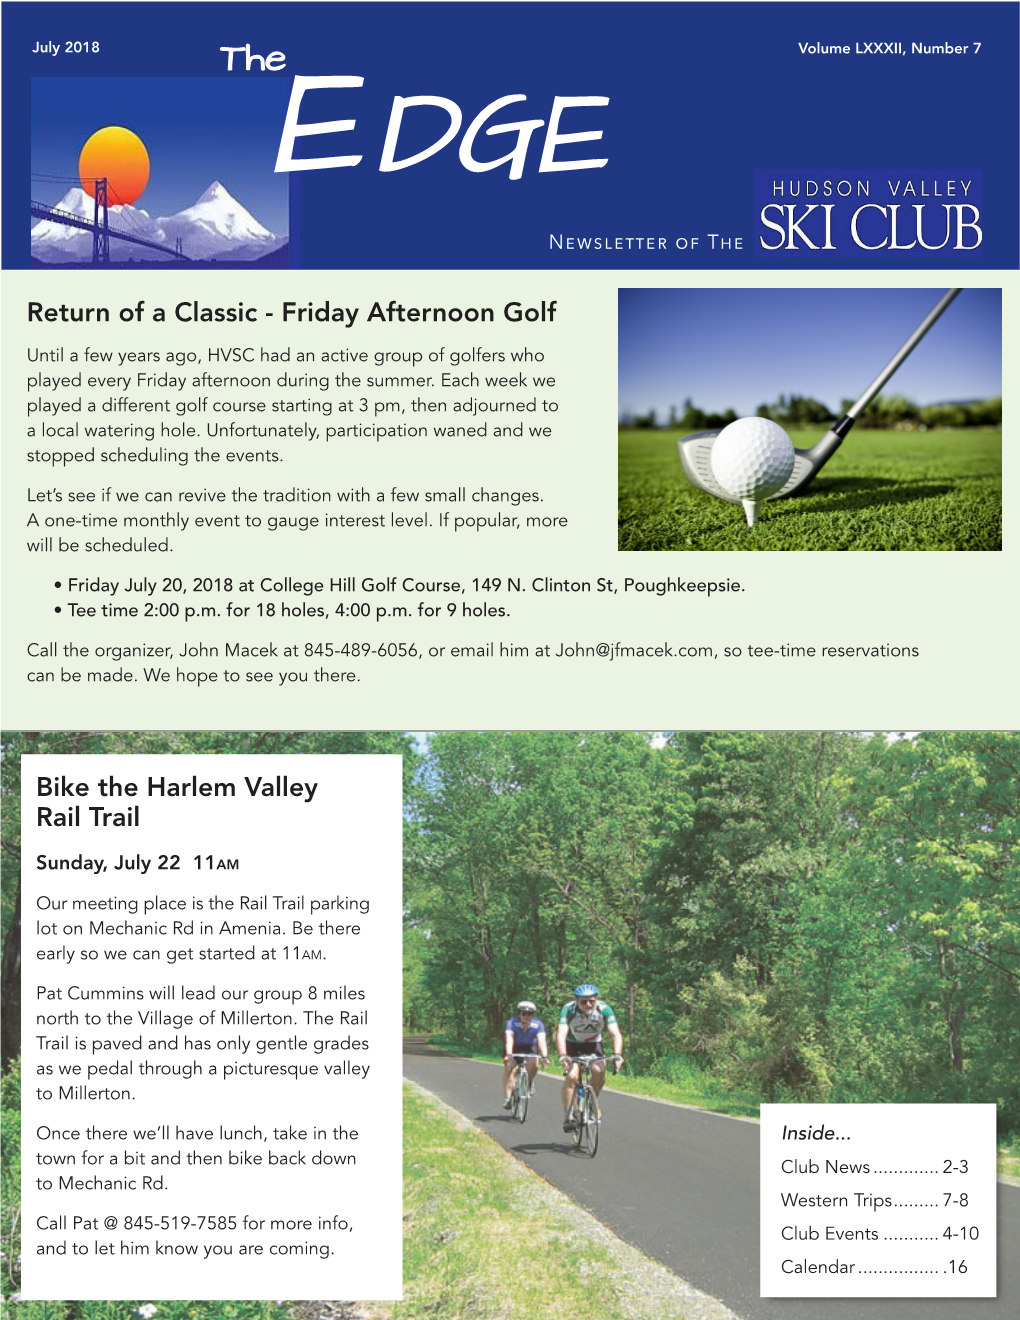 Friday Afternoon Golf Bike the Harlem Valley